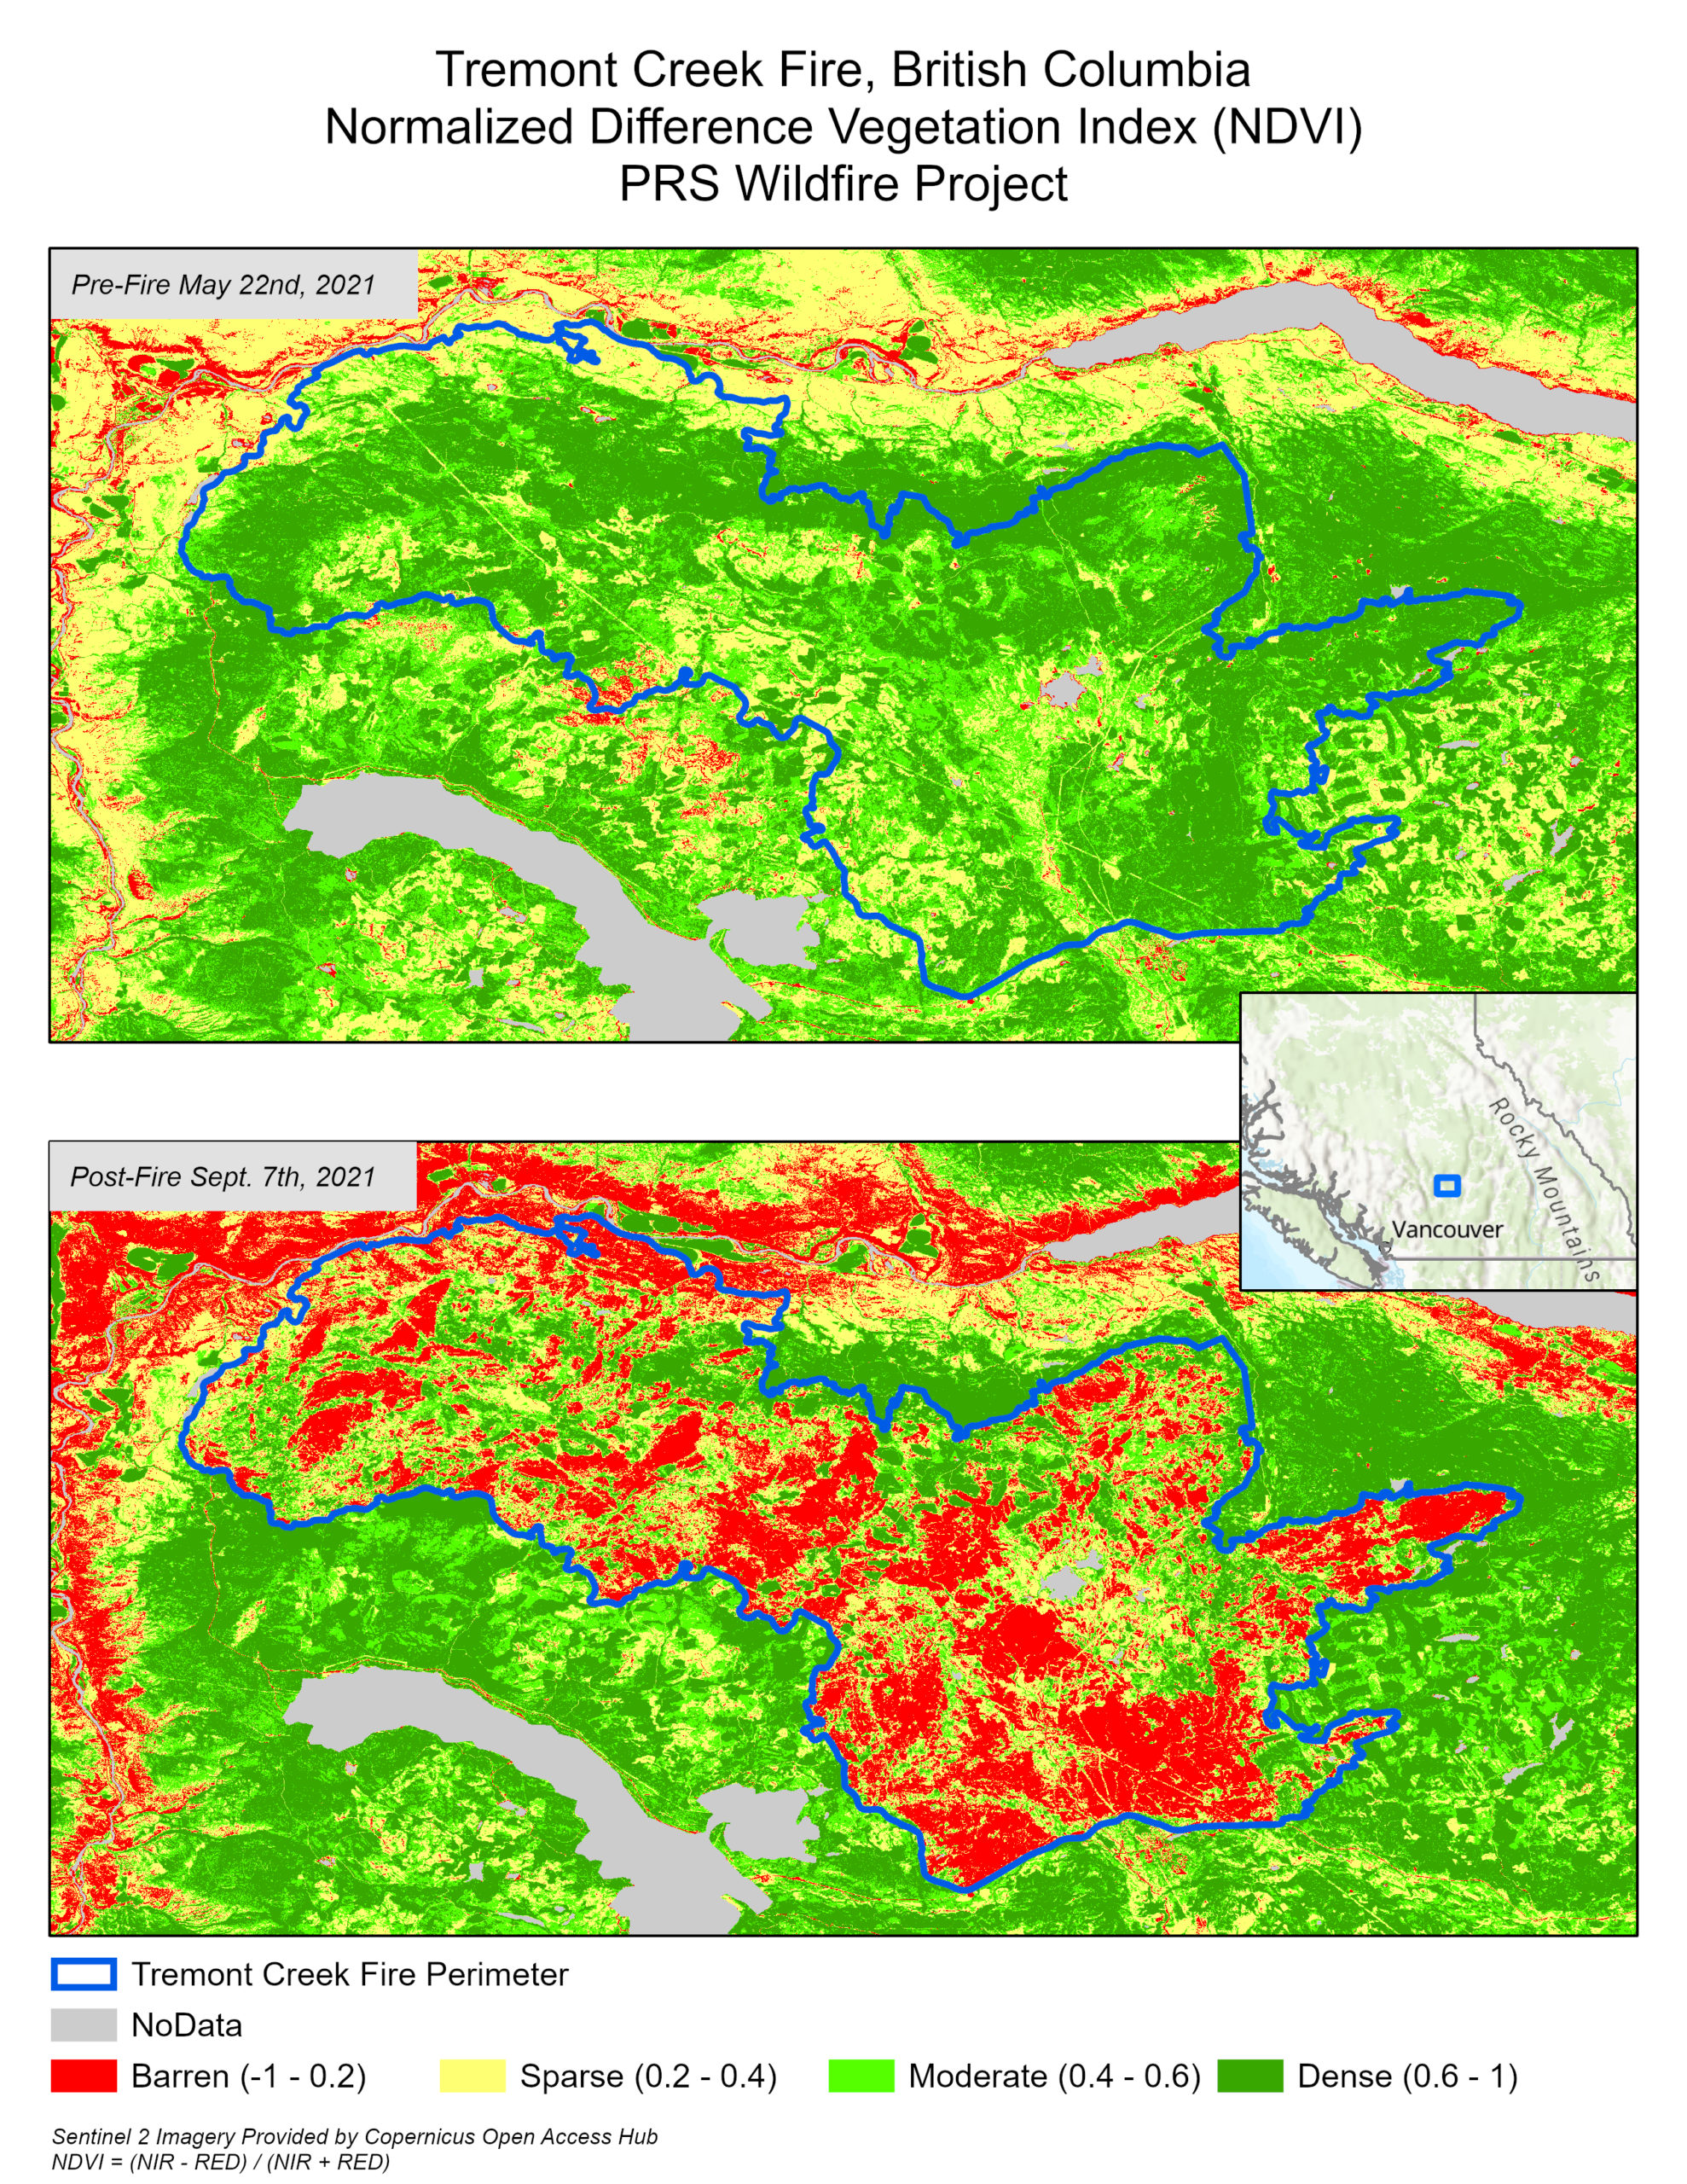 NDVI raster images for the pre and post-fire images for the Treemont Creek Fire in BC in 2021